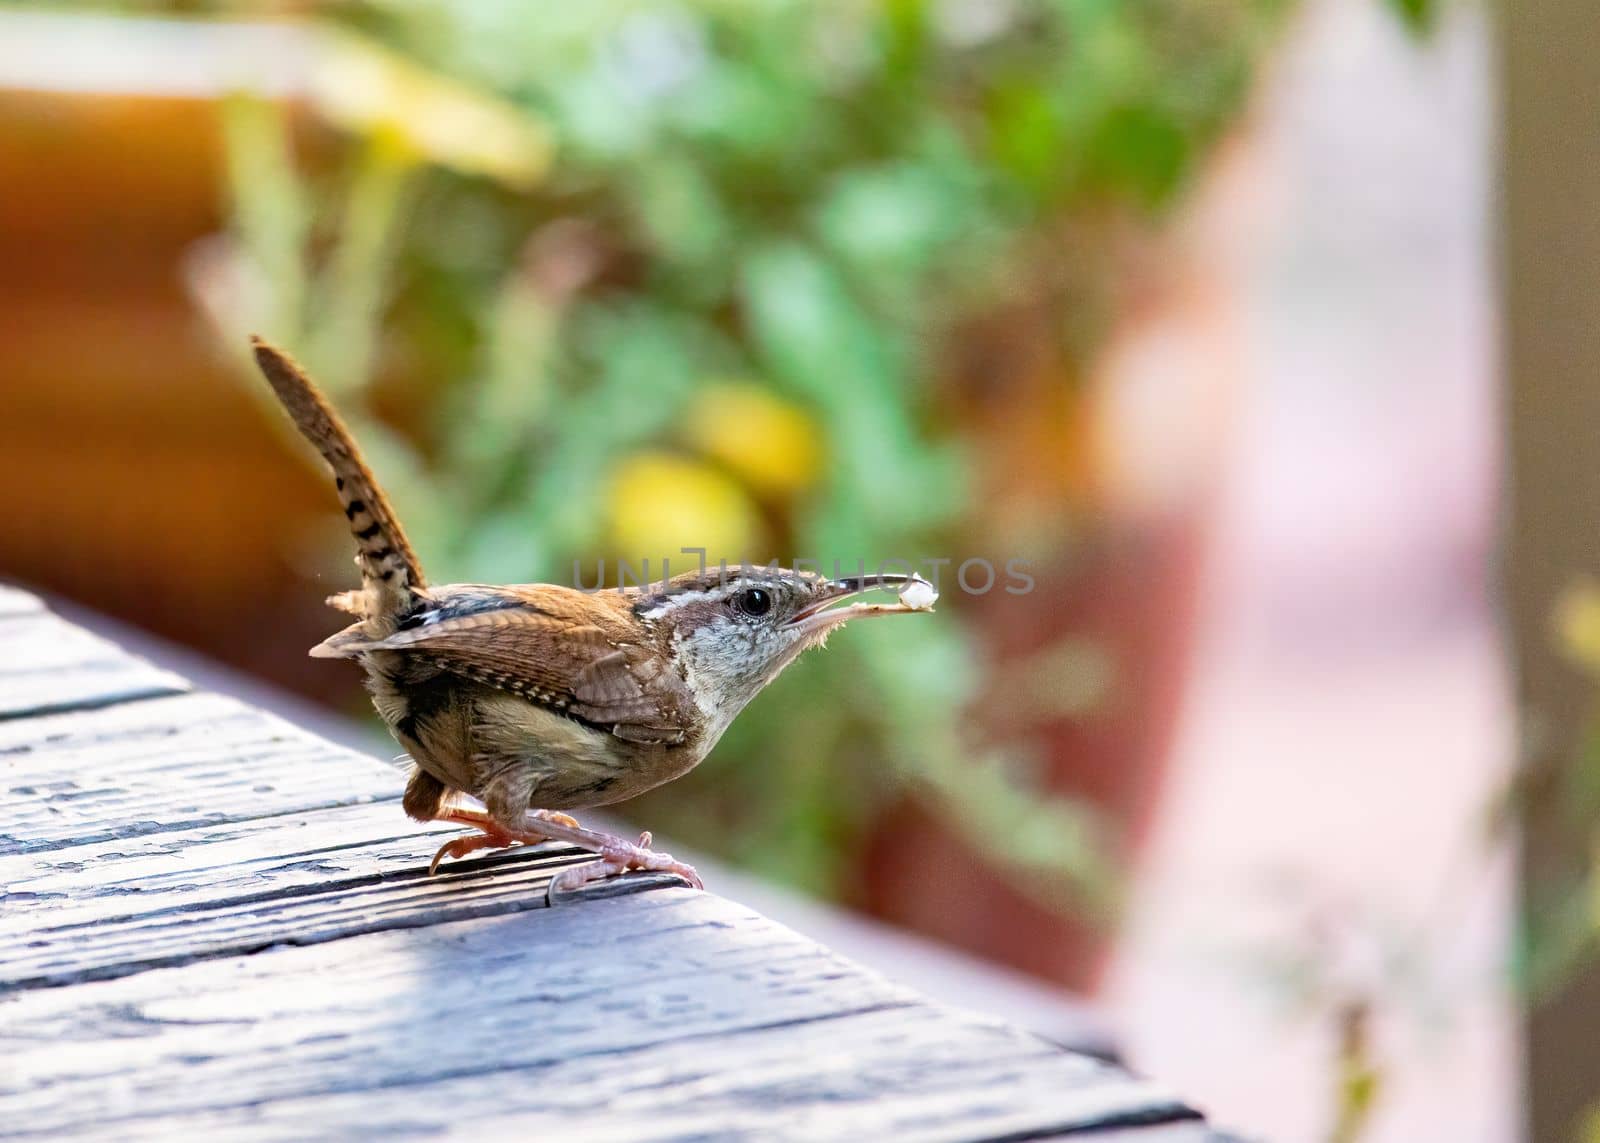 Carolina wren with food in its beak prepares to fly away from front porch.